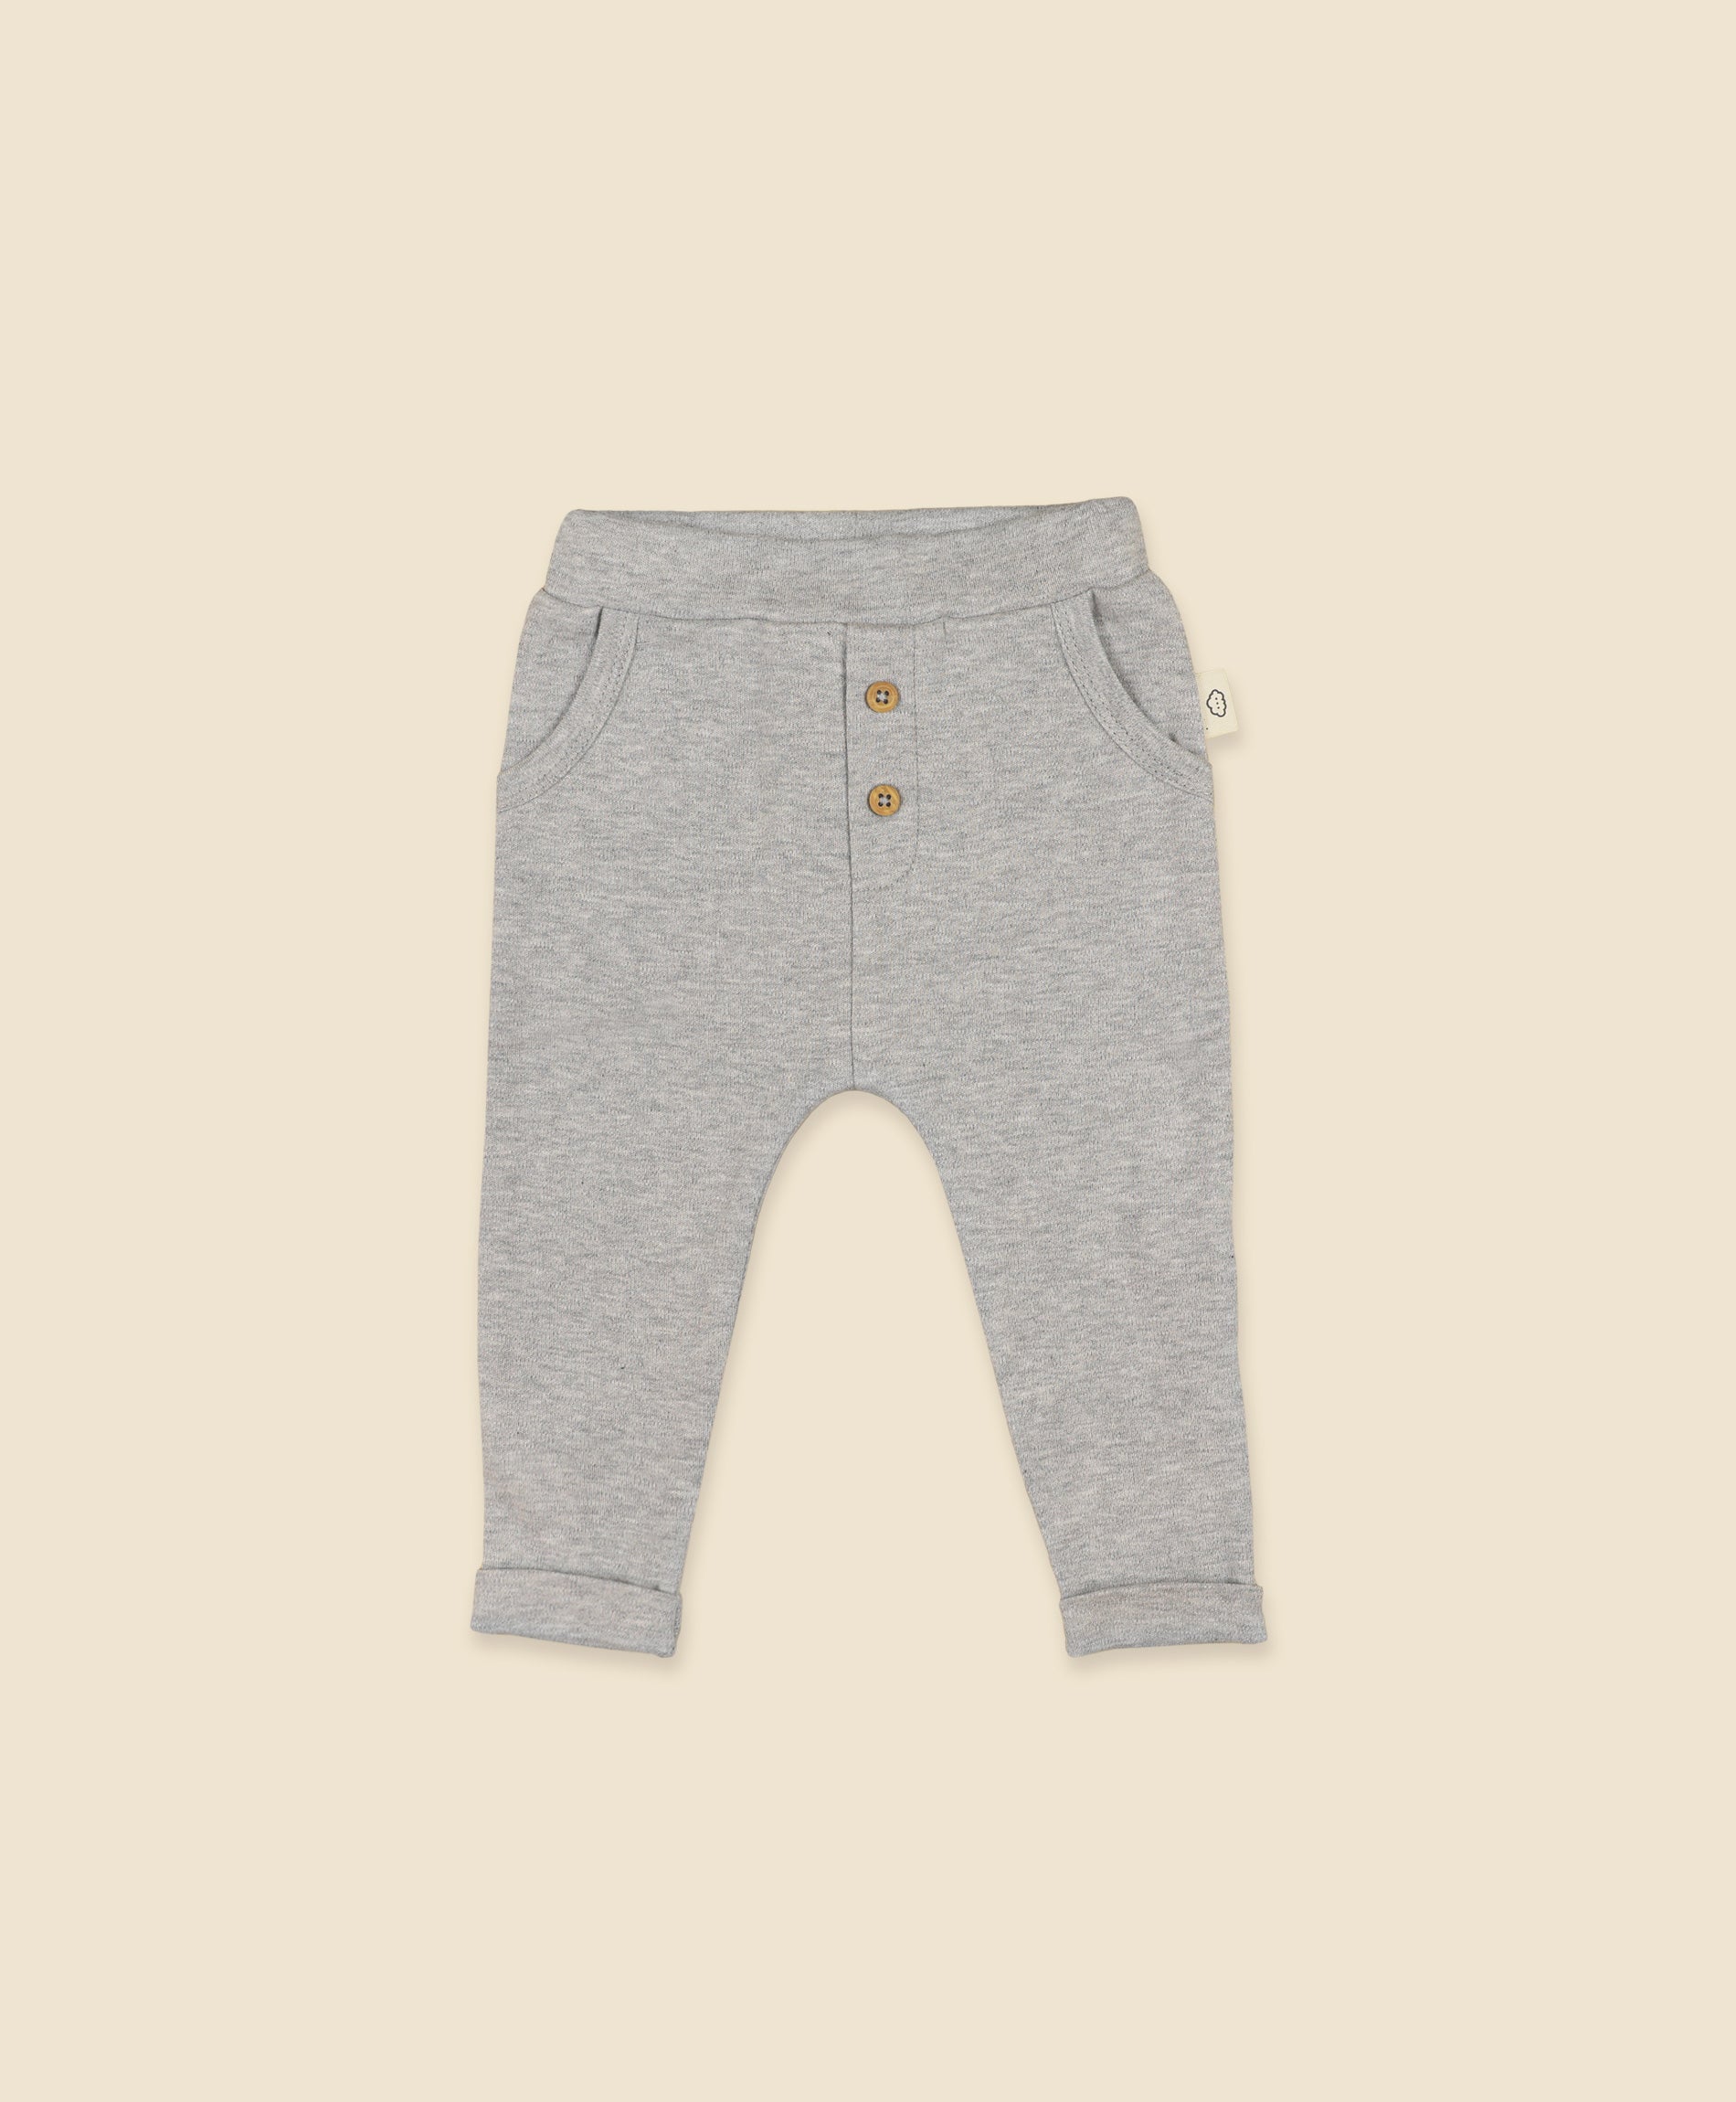 Slouchy Track Pants - Heather Grey